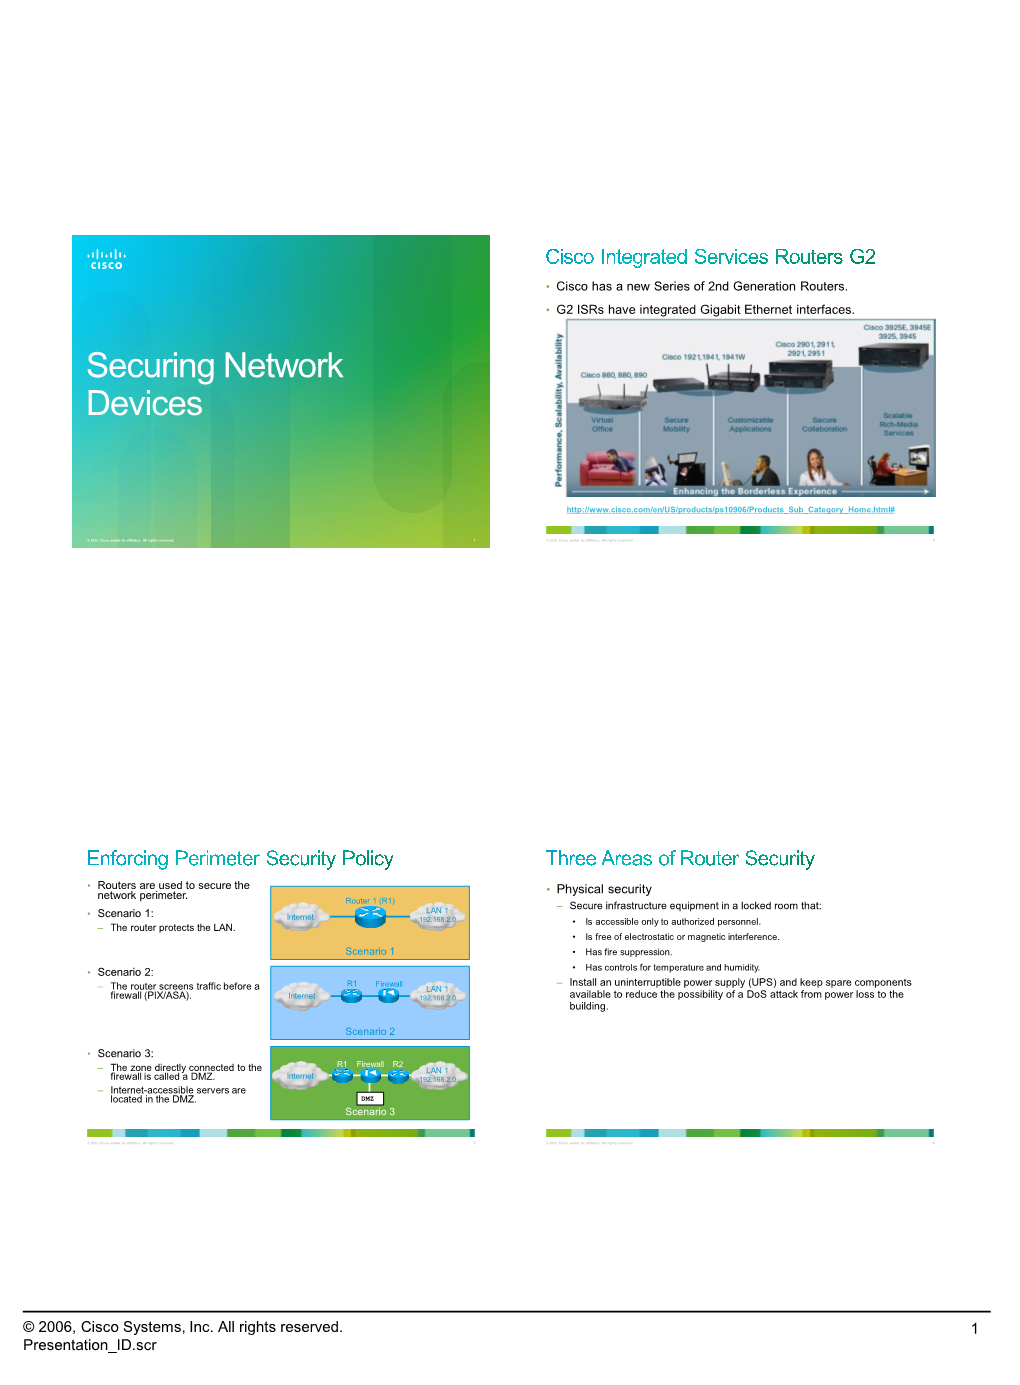 Securing Network Devices